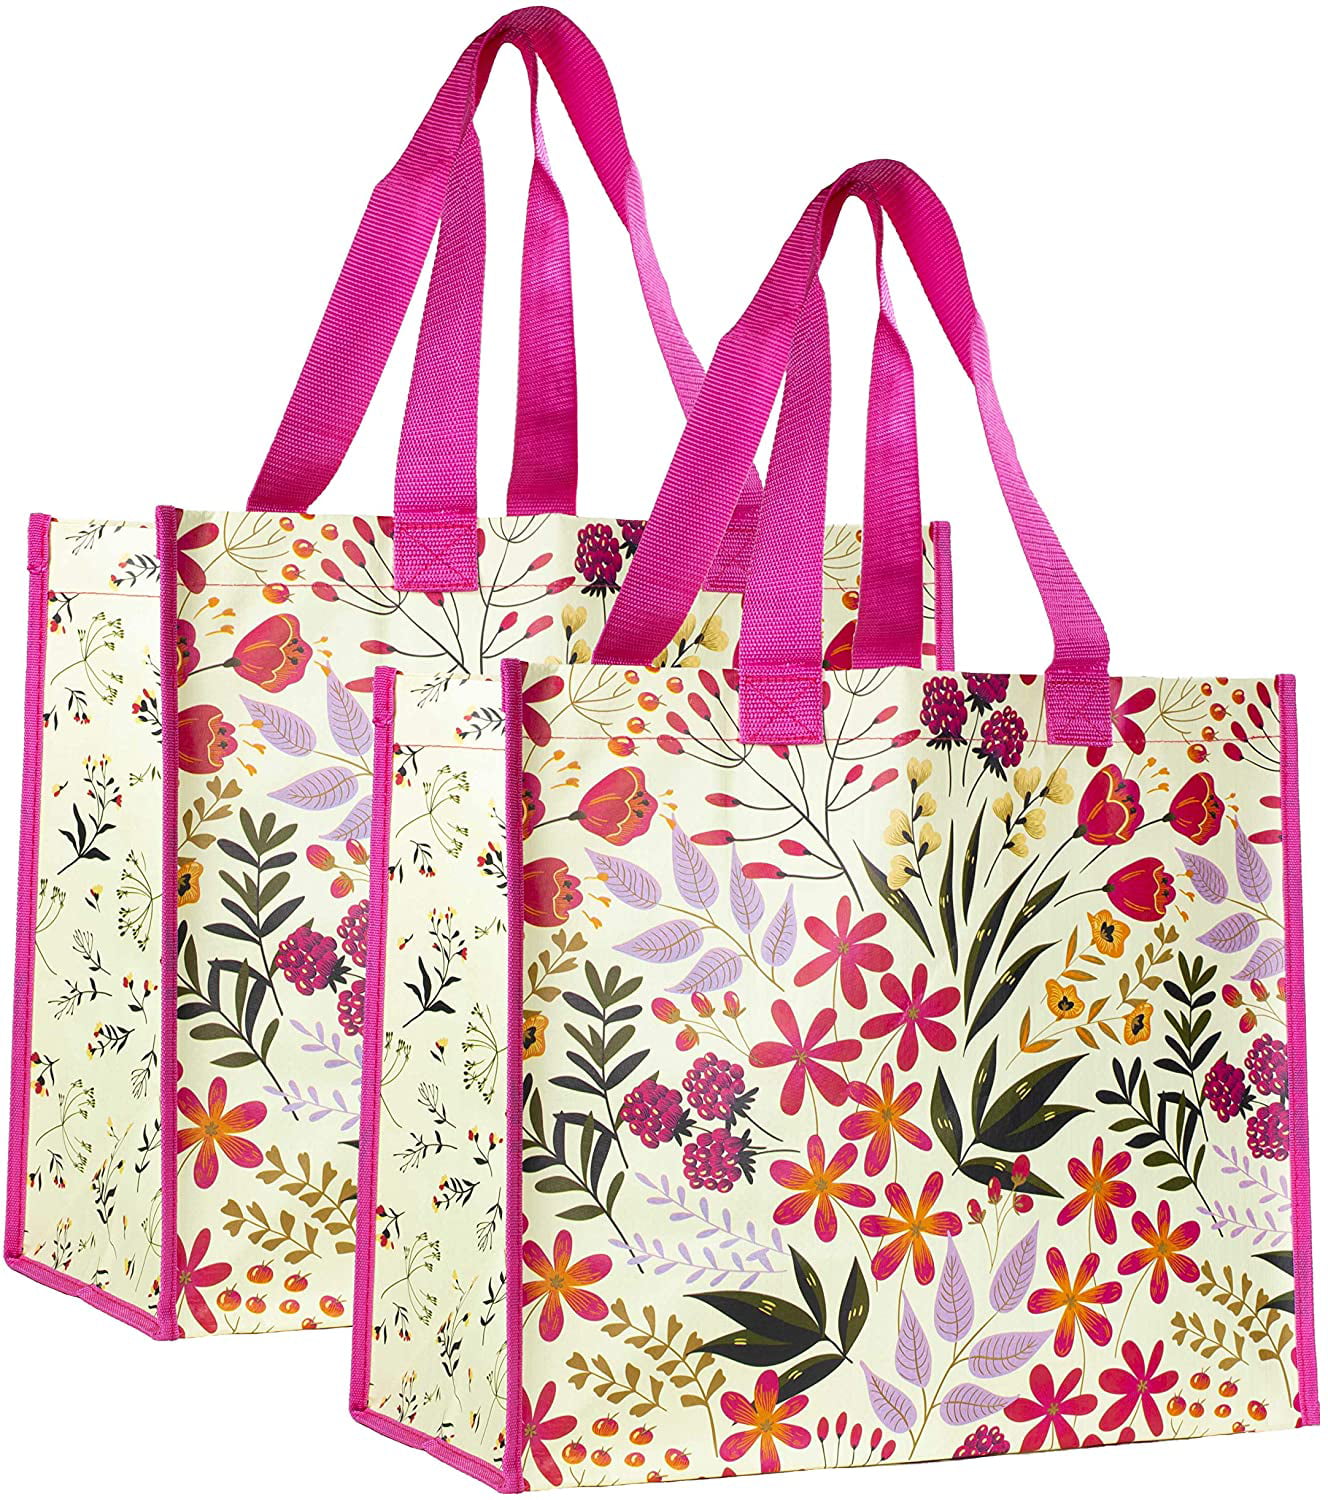 Steel Mill & Co. Oversize Reusable Tote Bag Set of 2, Heavy Duty Eco Market  Shopping Bag with Durable Shoulder Straps, Wildflowers 